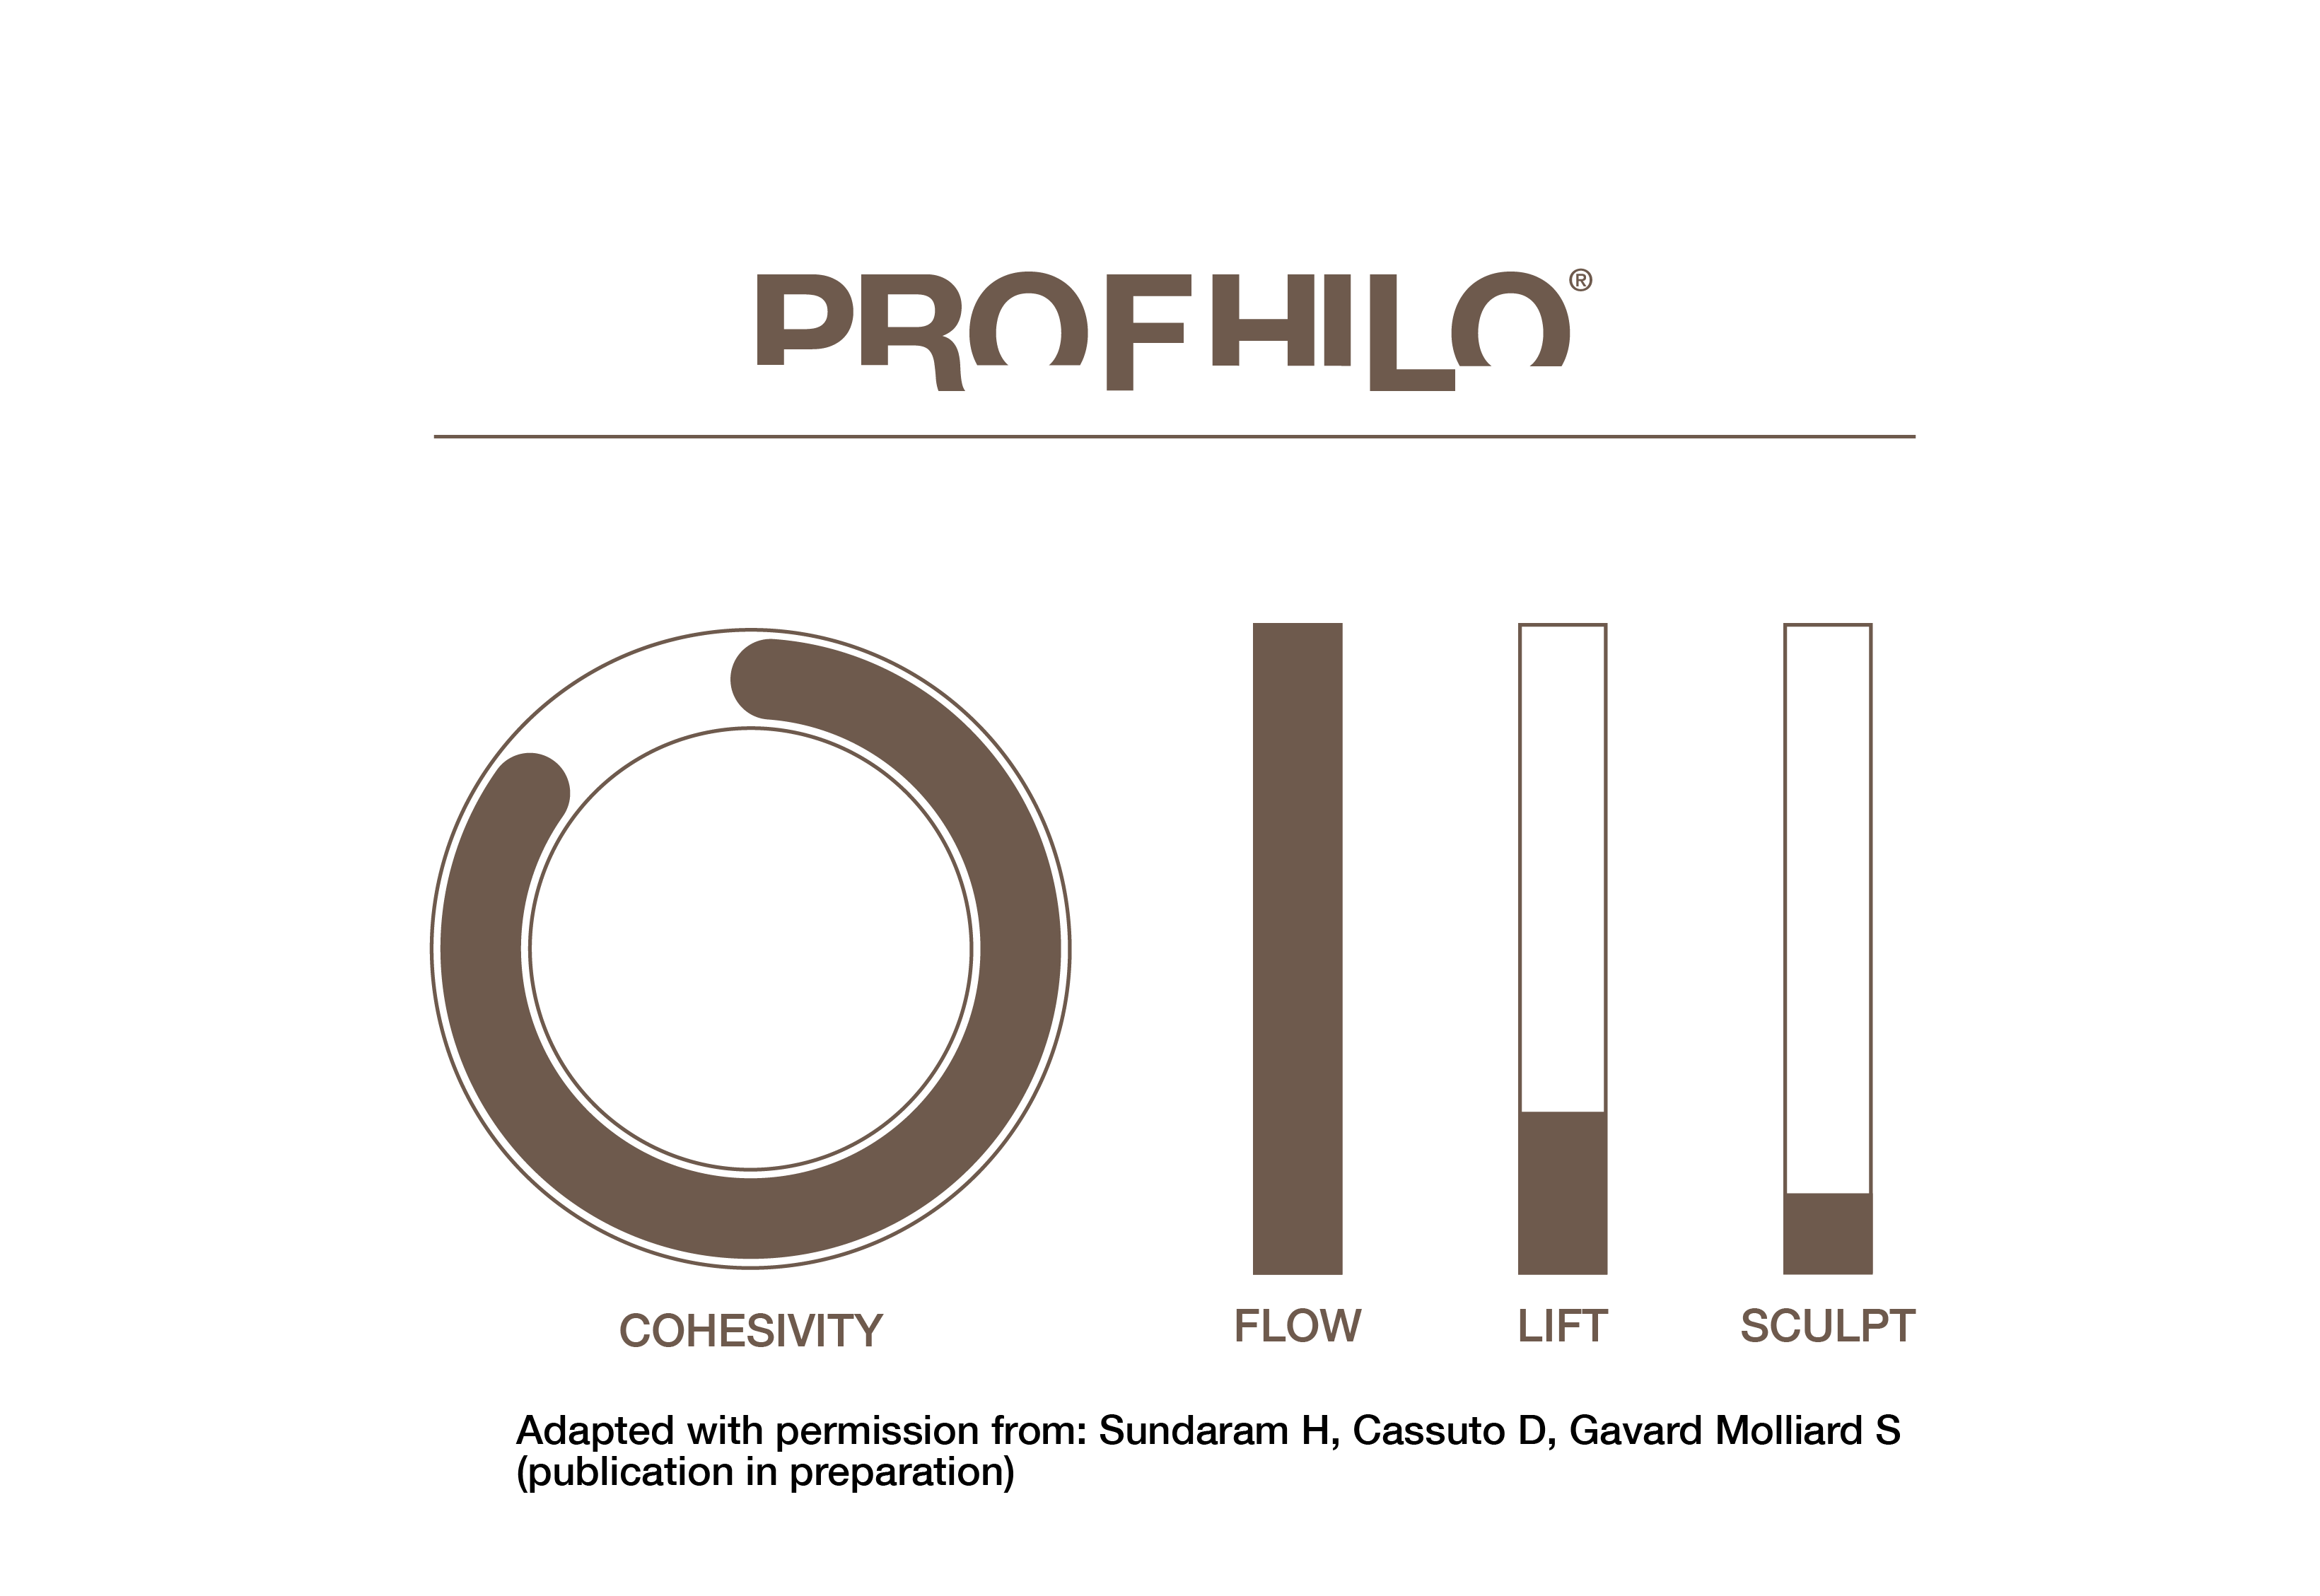 PROFHILO_gps_scale-2.png